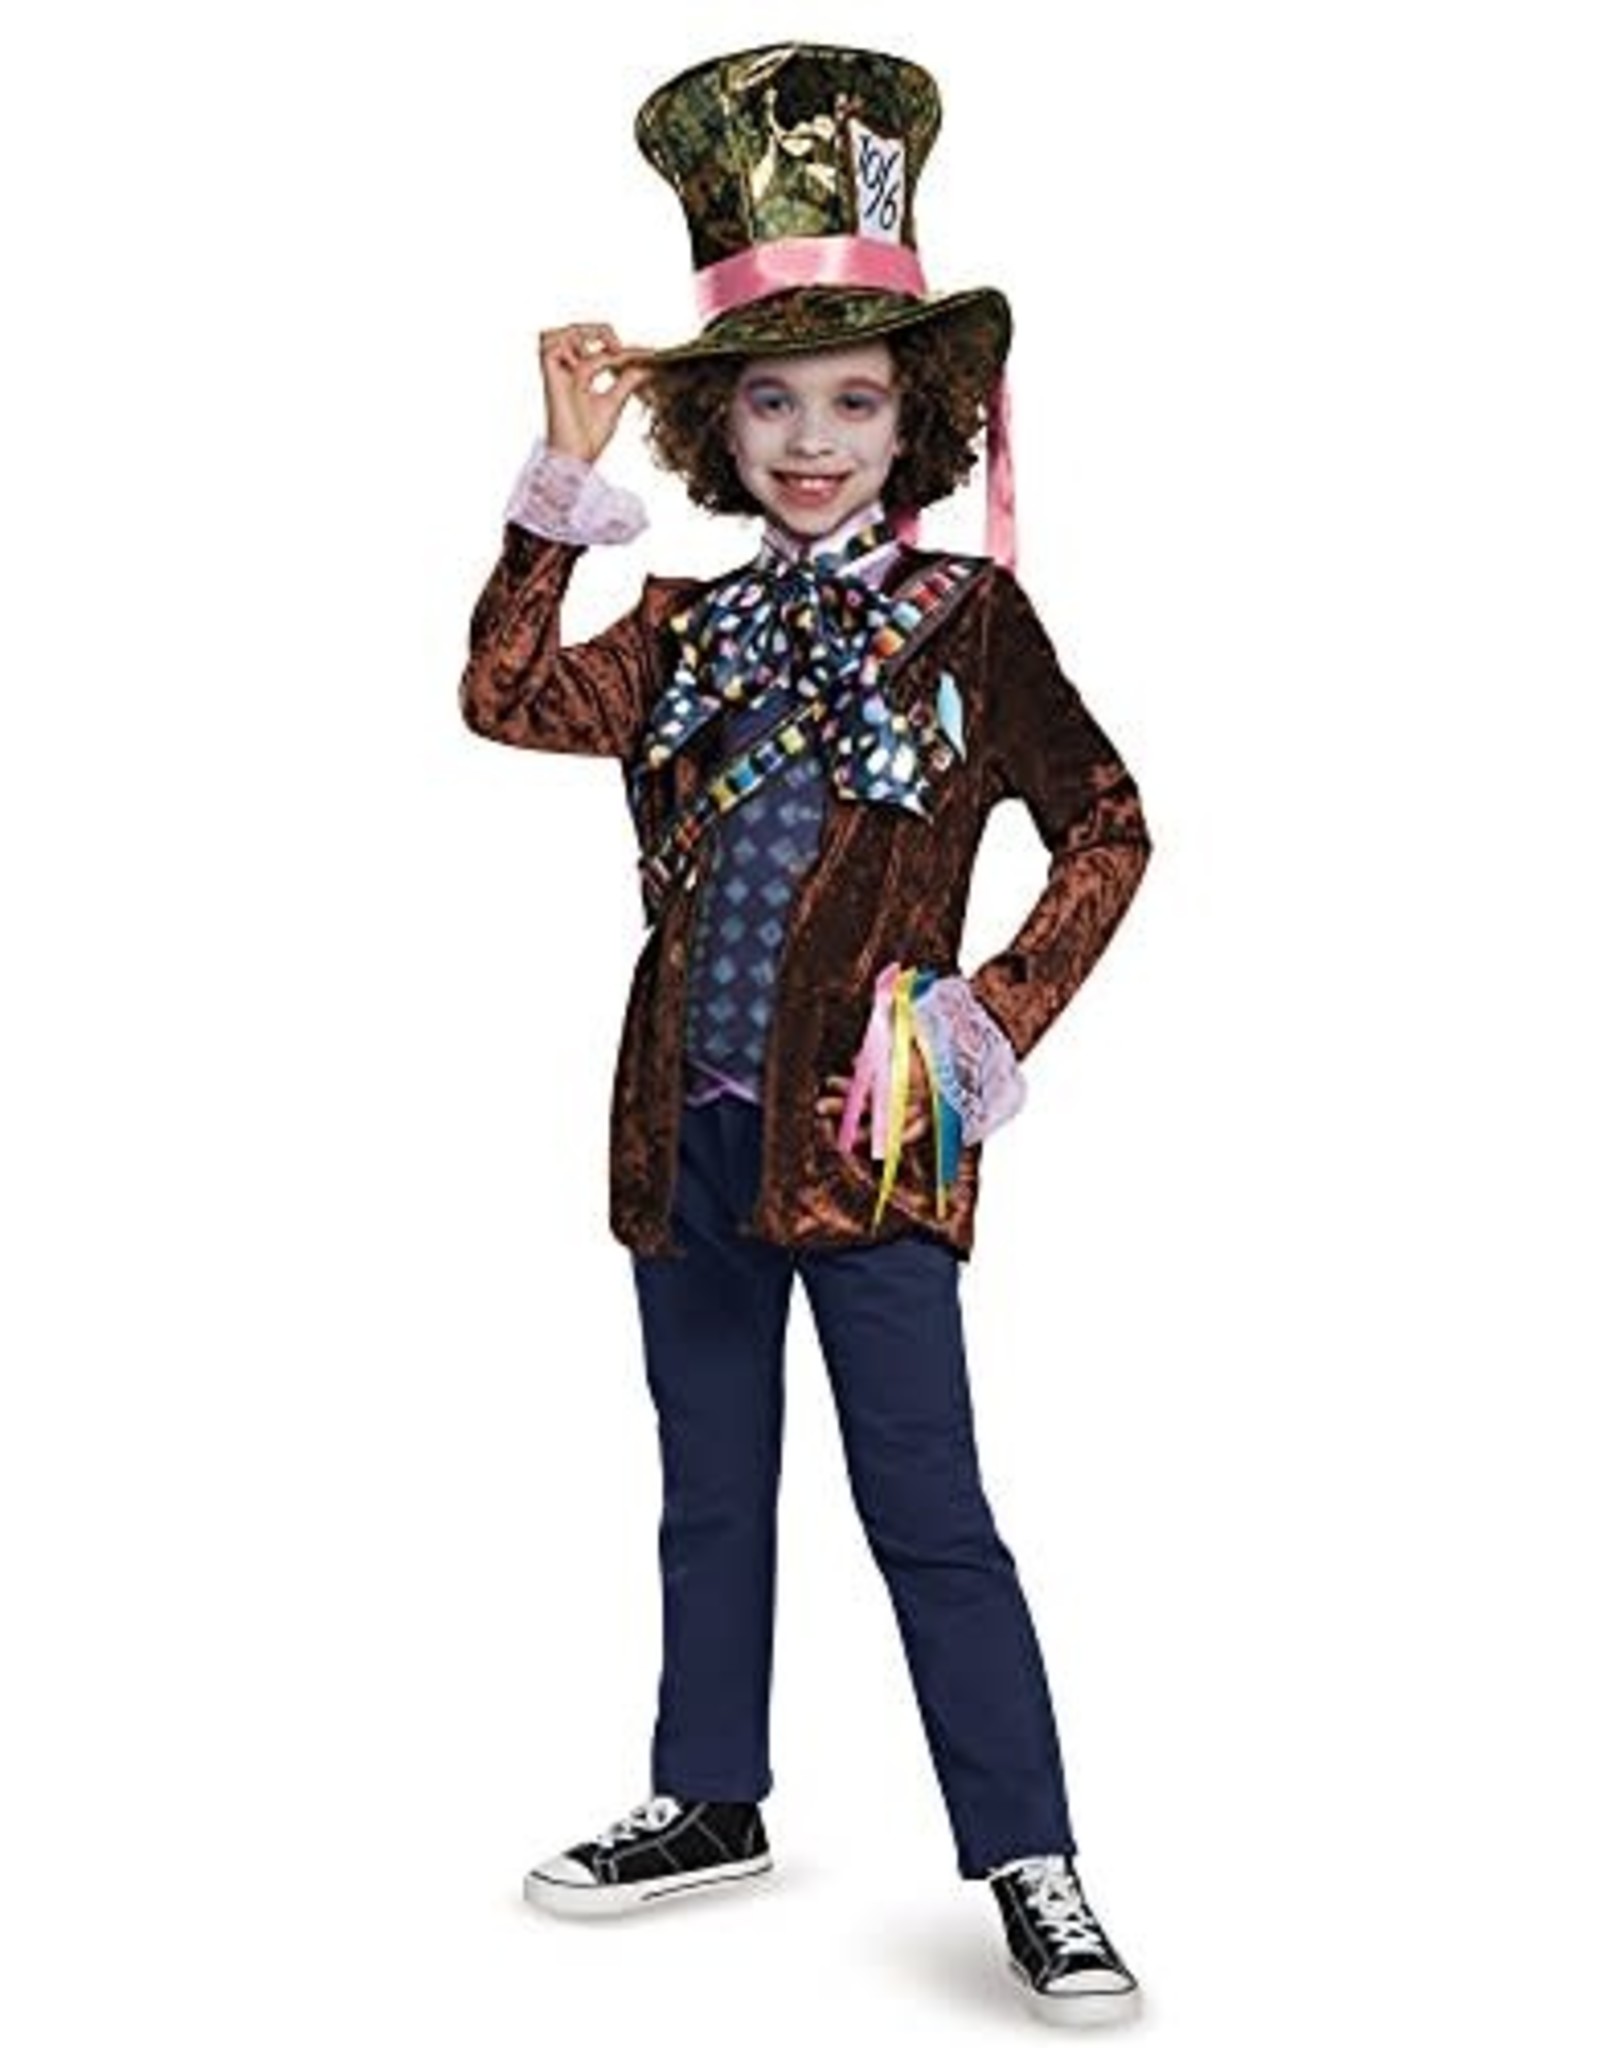 Disguise Inc Mad Hatter, Brown, L - Large, 10136